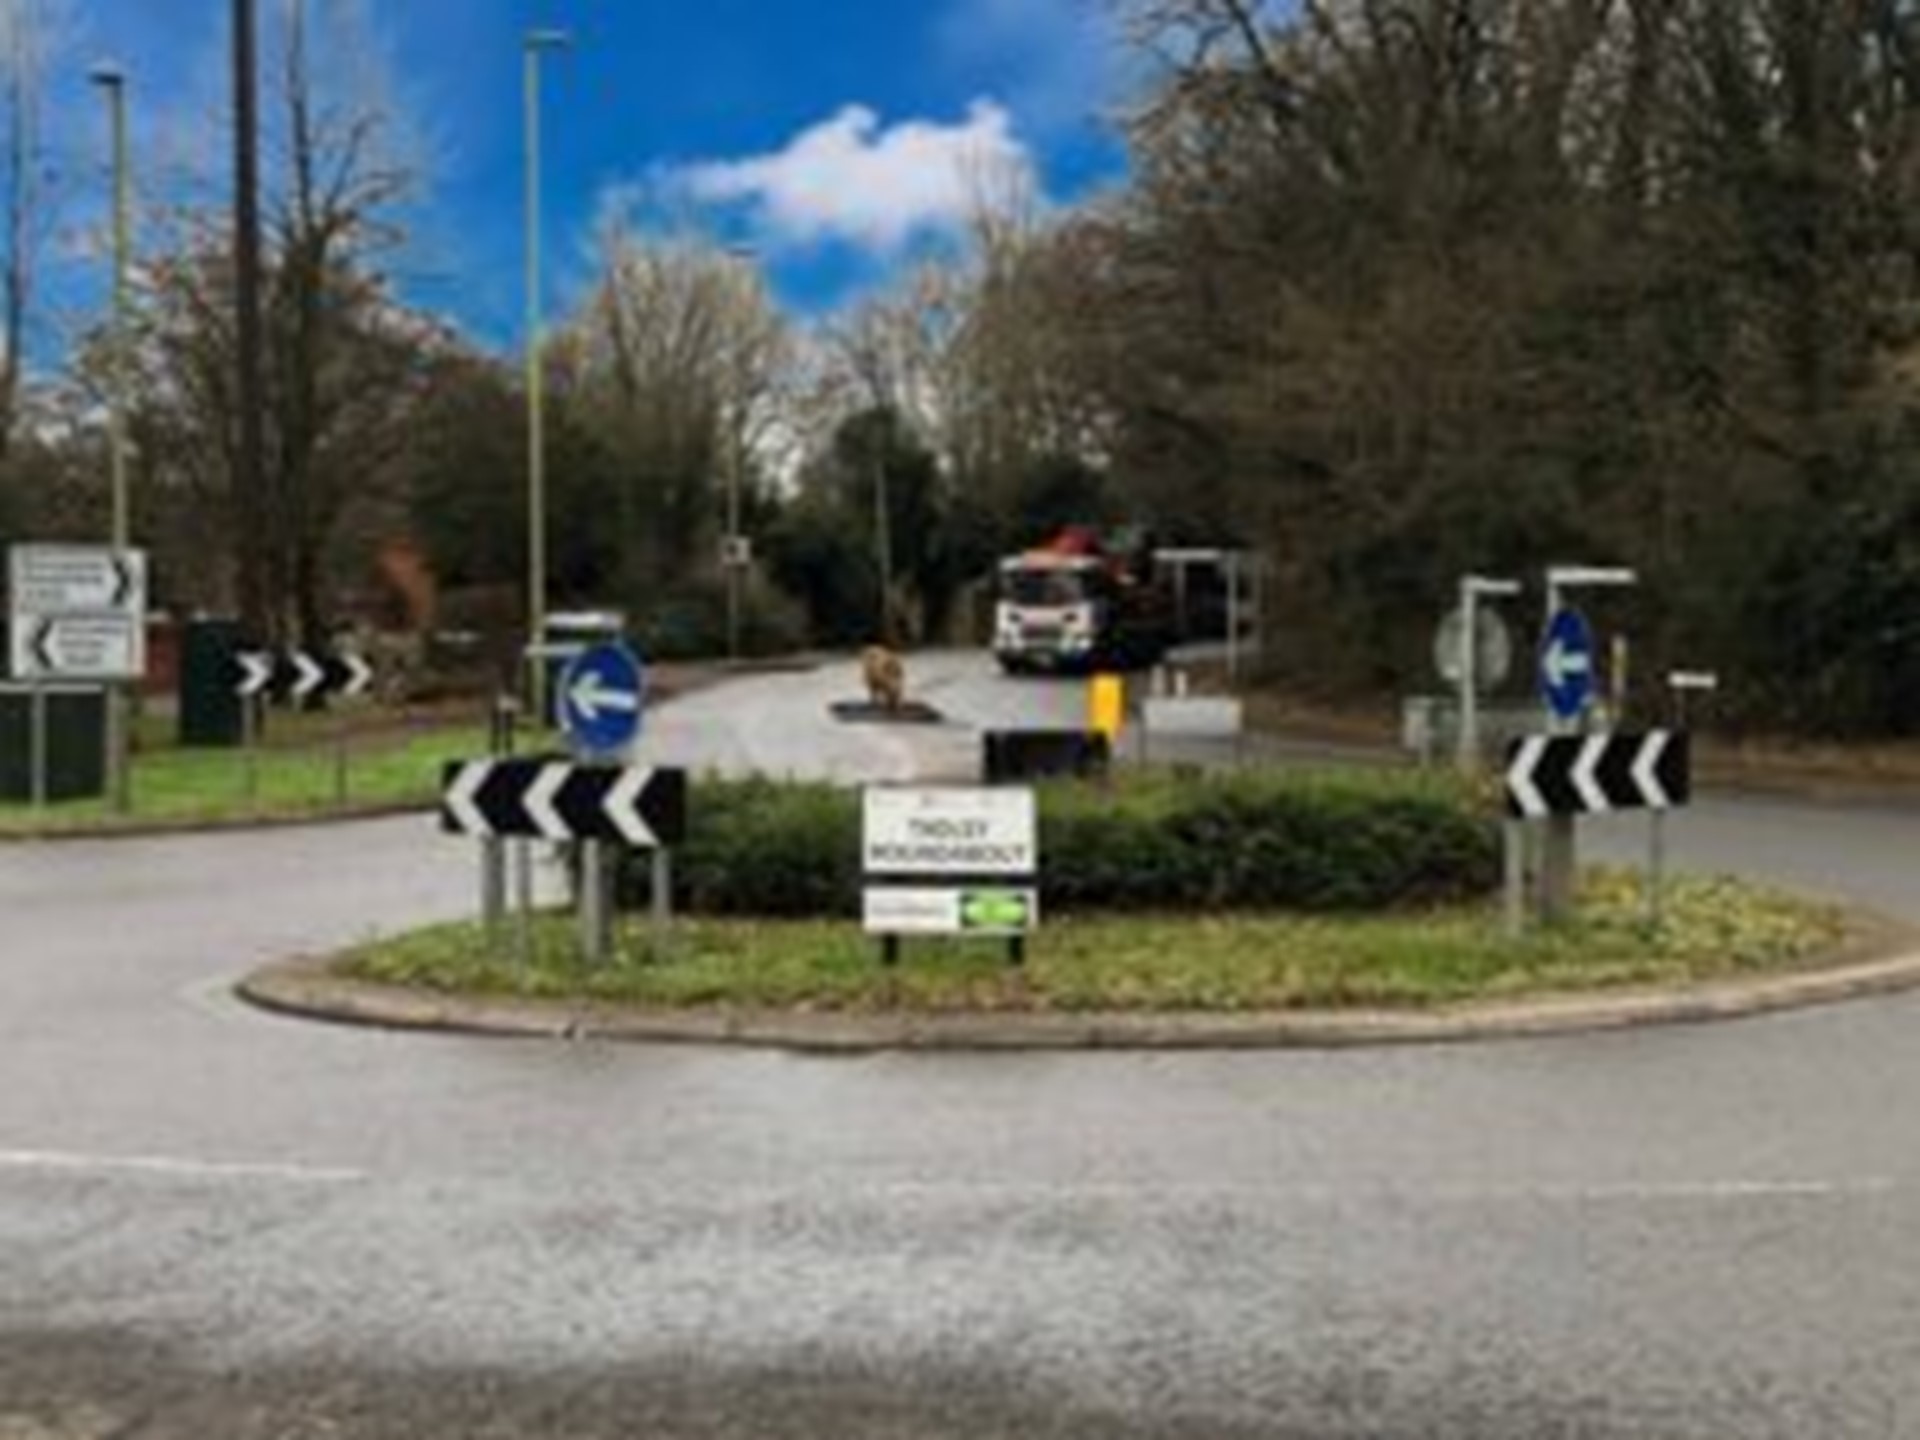 Picture of the roundabout in Tadley